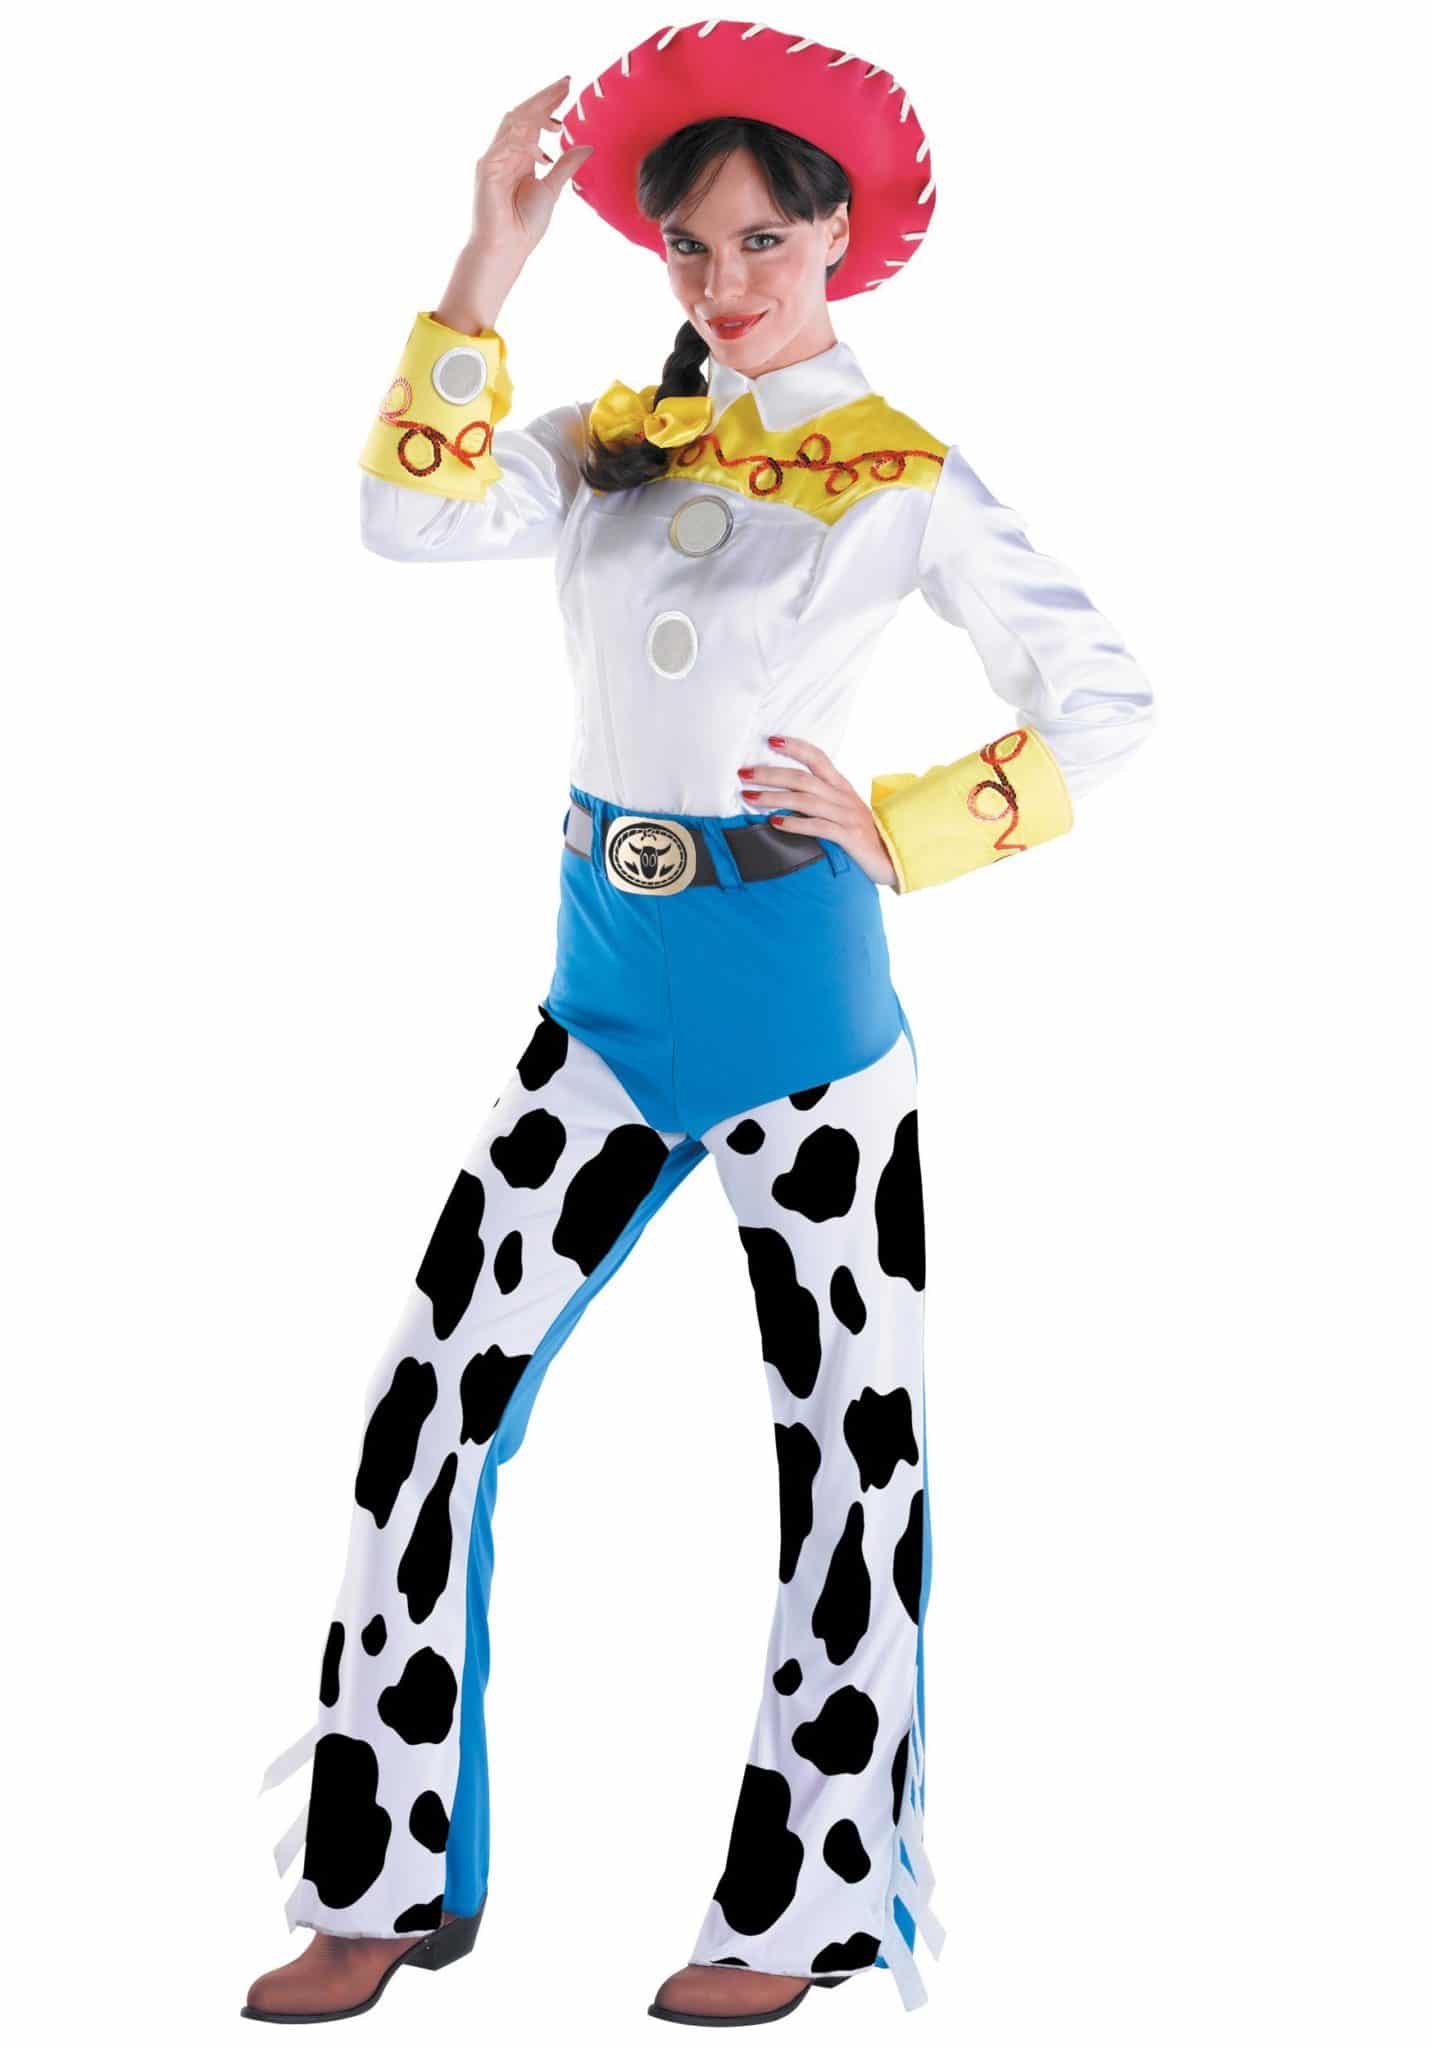 Toy Story 4 Halloween Costumes 2023: Adult Jessie